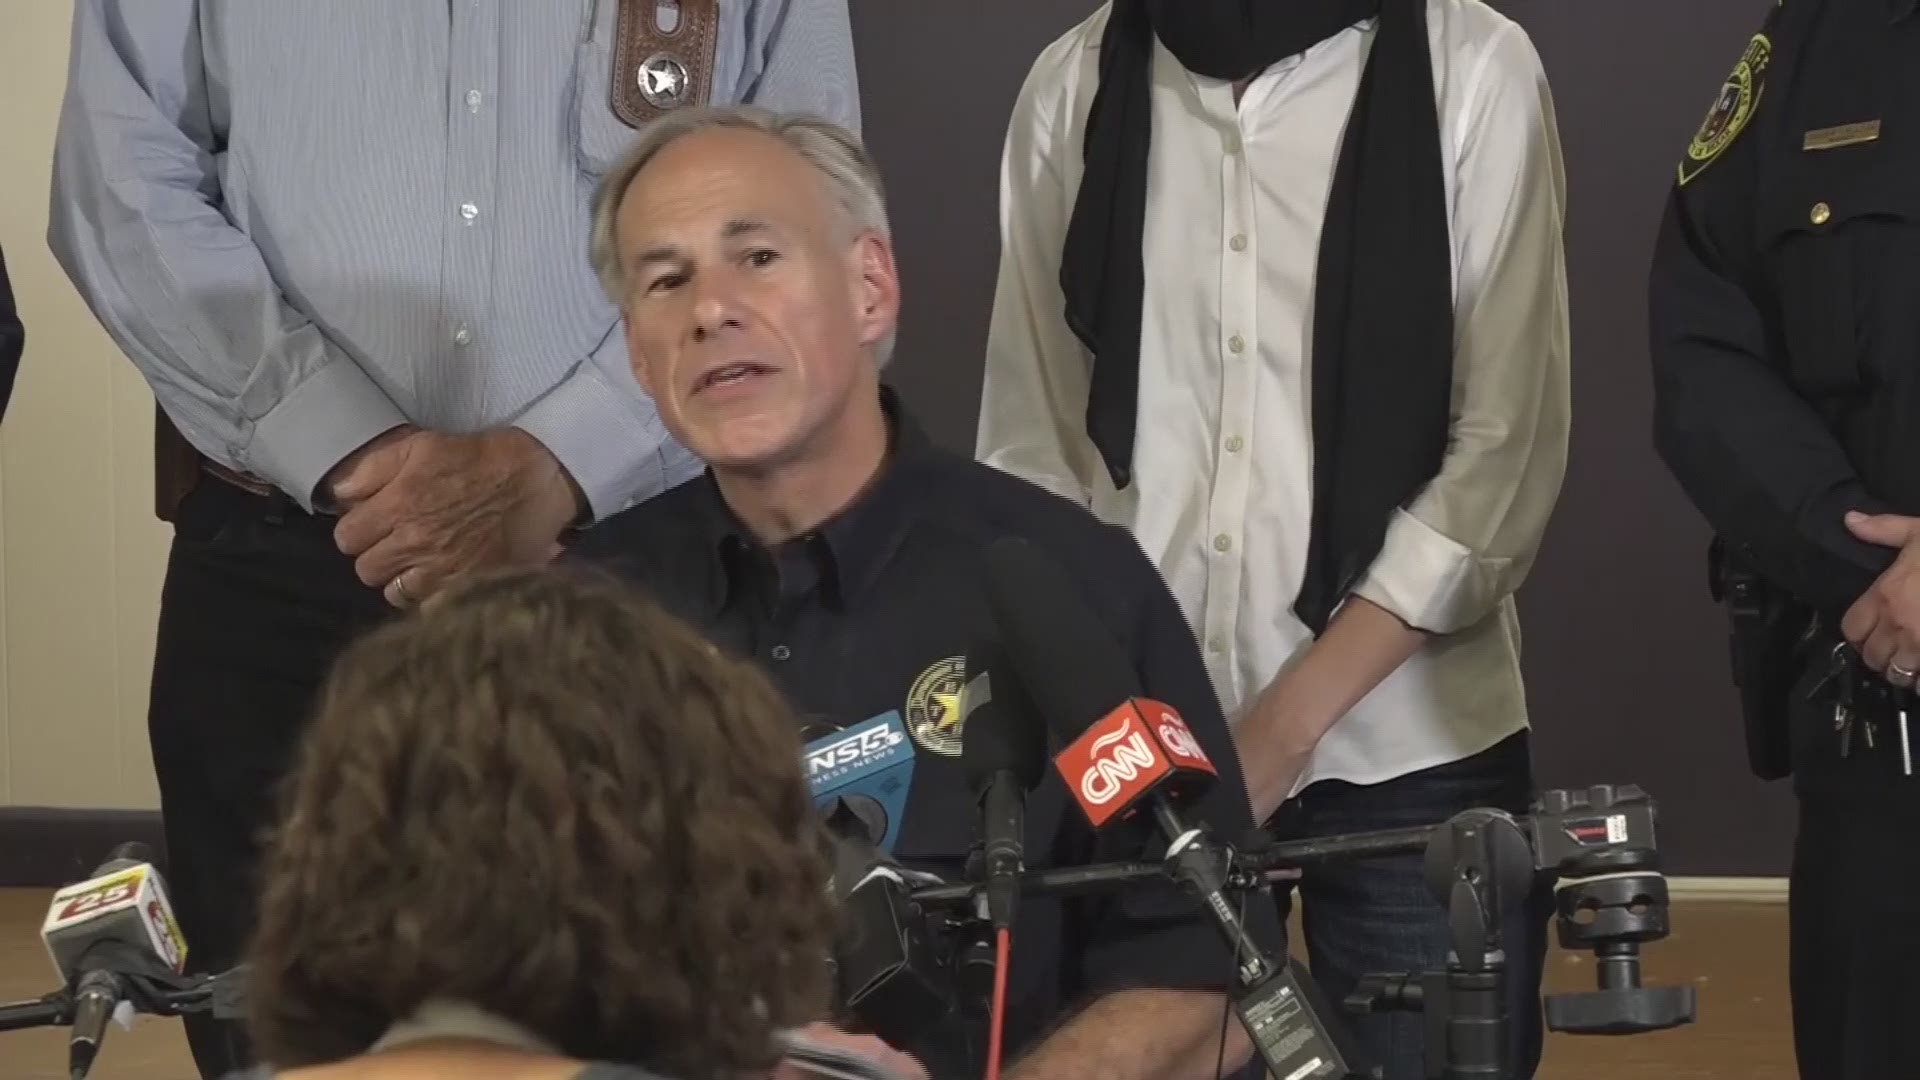 Texas Governor Greg Abbott says at least 26 people have died in the church shooting that happened in Sutherland Springs outside of San Antonio.